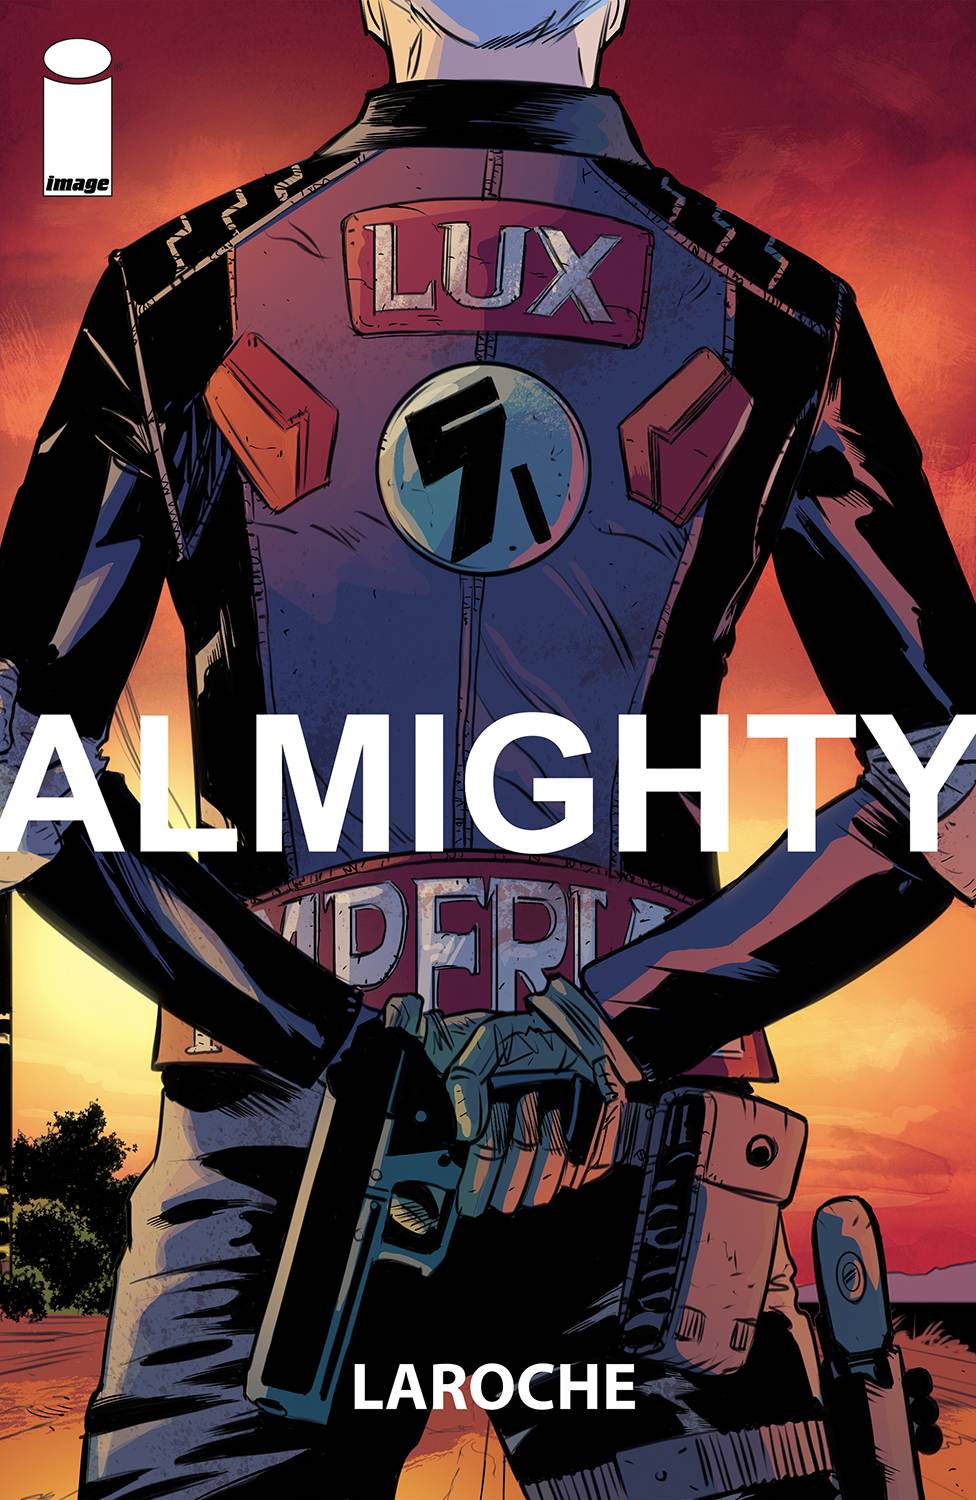 ALMIGHTY #1 (OF 5) (MR)